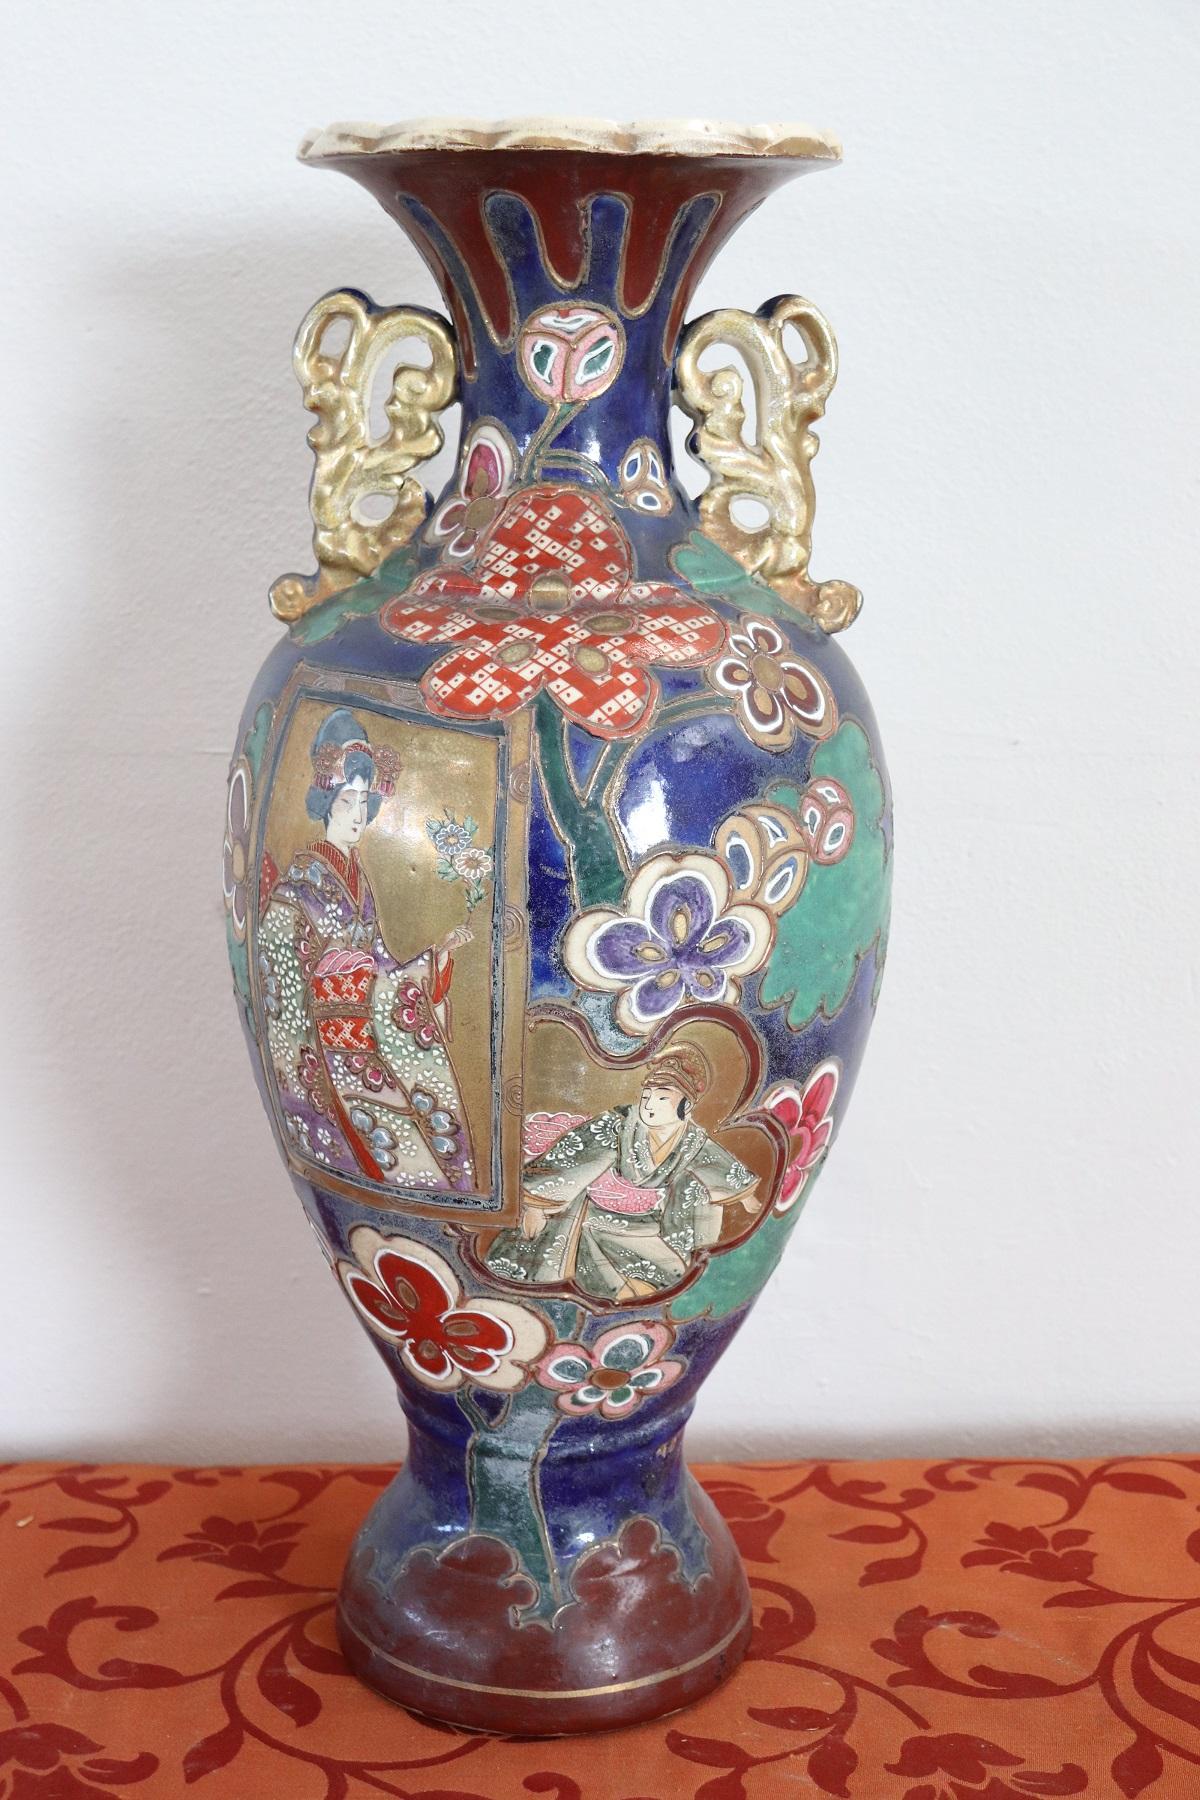 Refined polychrome ceramic vase Japanese, 1960s. Beautiful Satsuma decoration with flowers and characters. Ideal for decorating an Asian Style home.